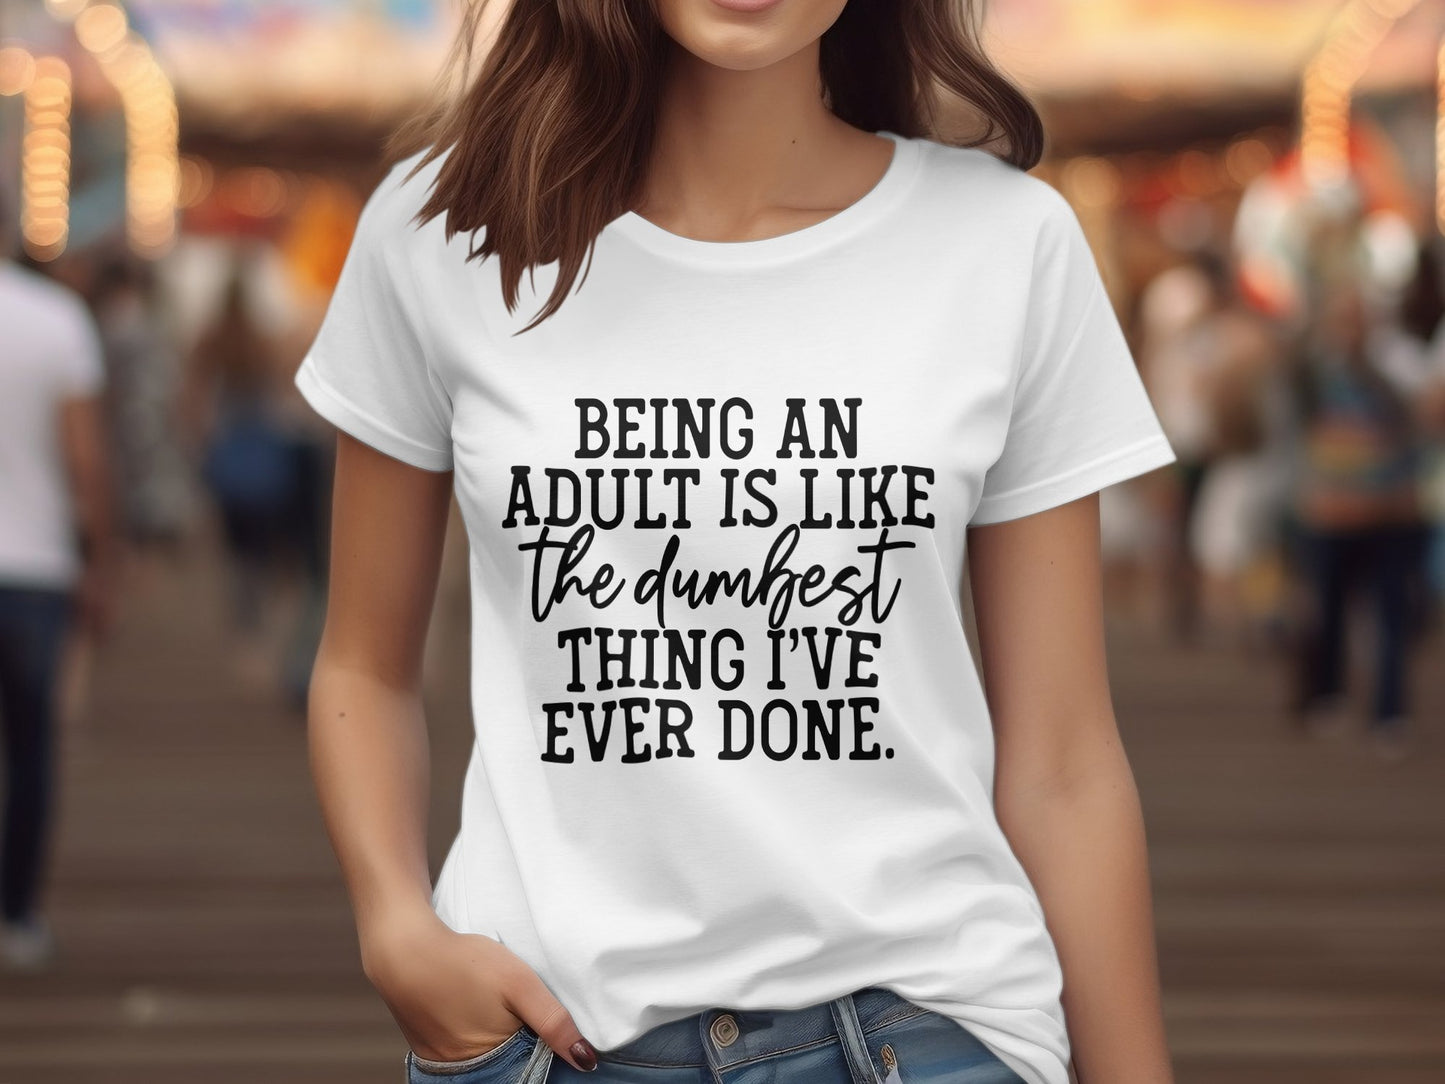 Being An Adult is Like the dumbest thing I've Ever Done. (Christmas T-shirt)